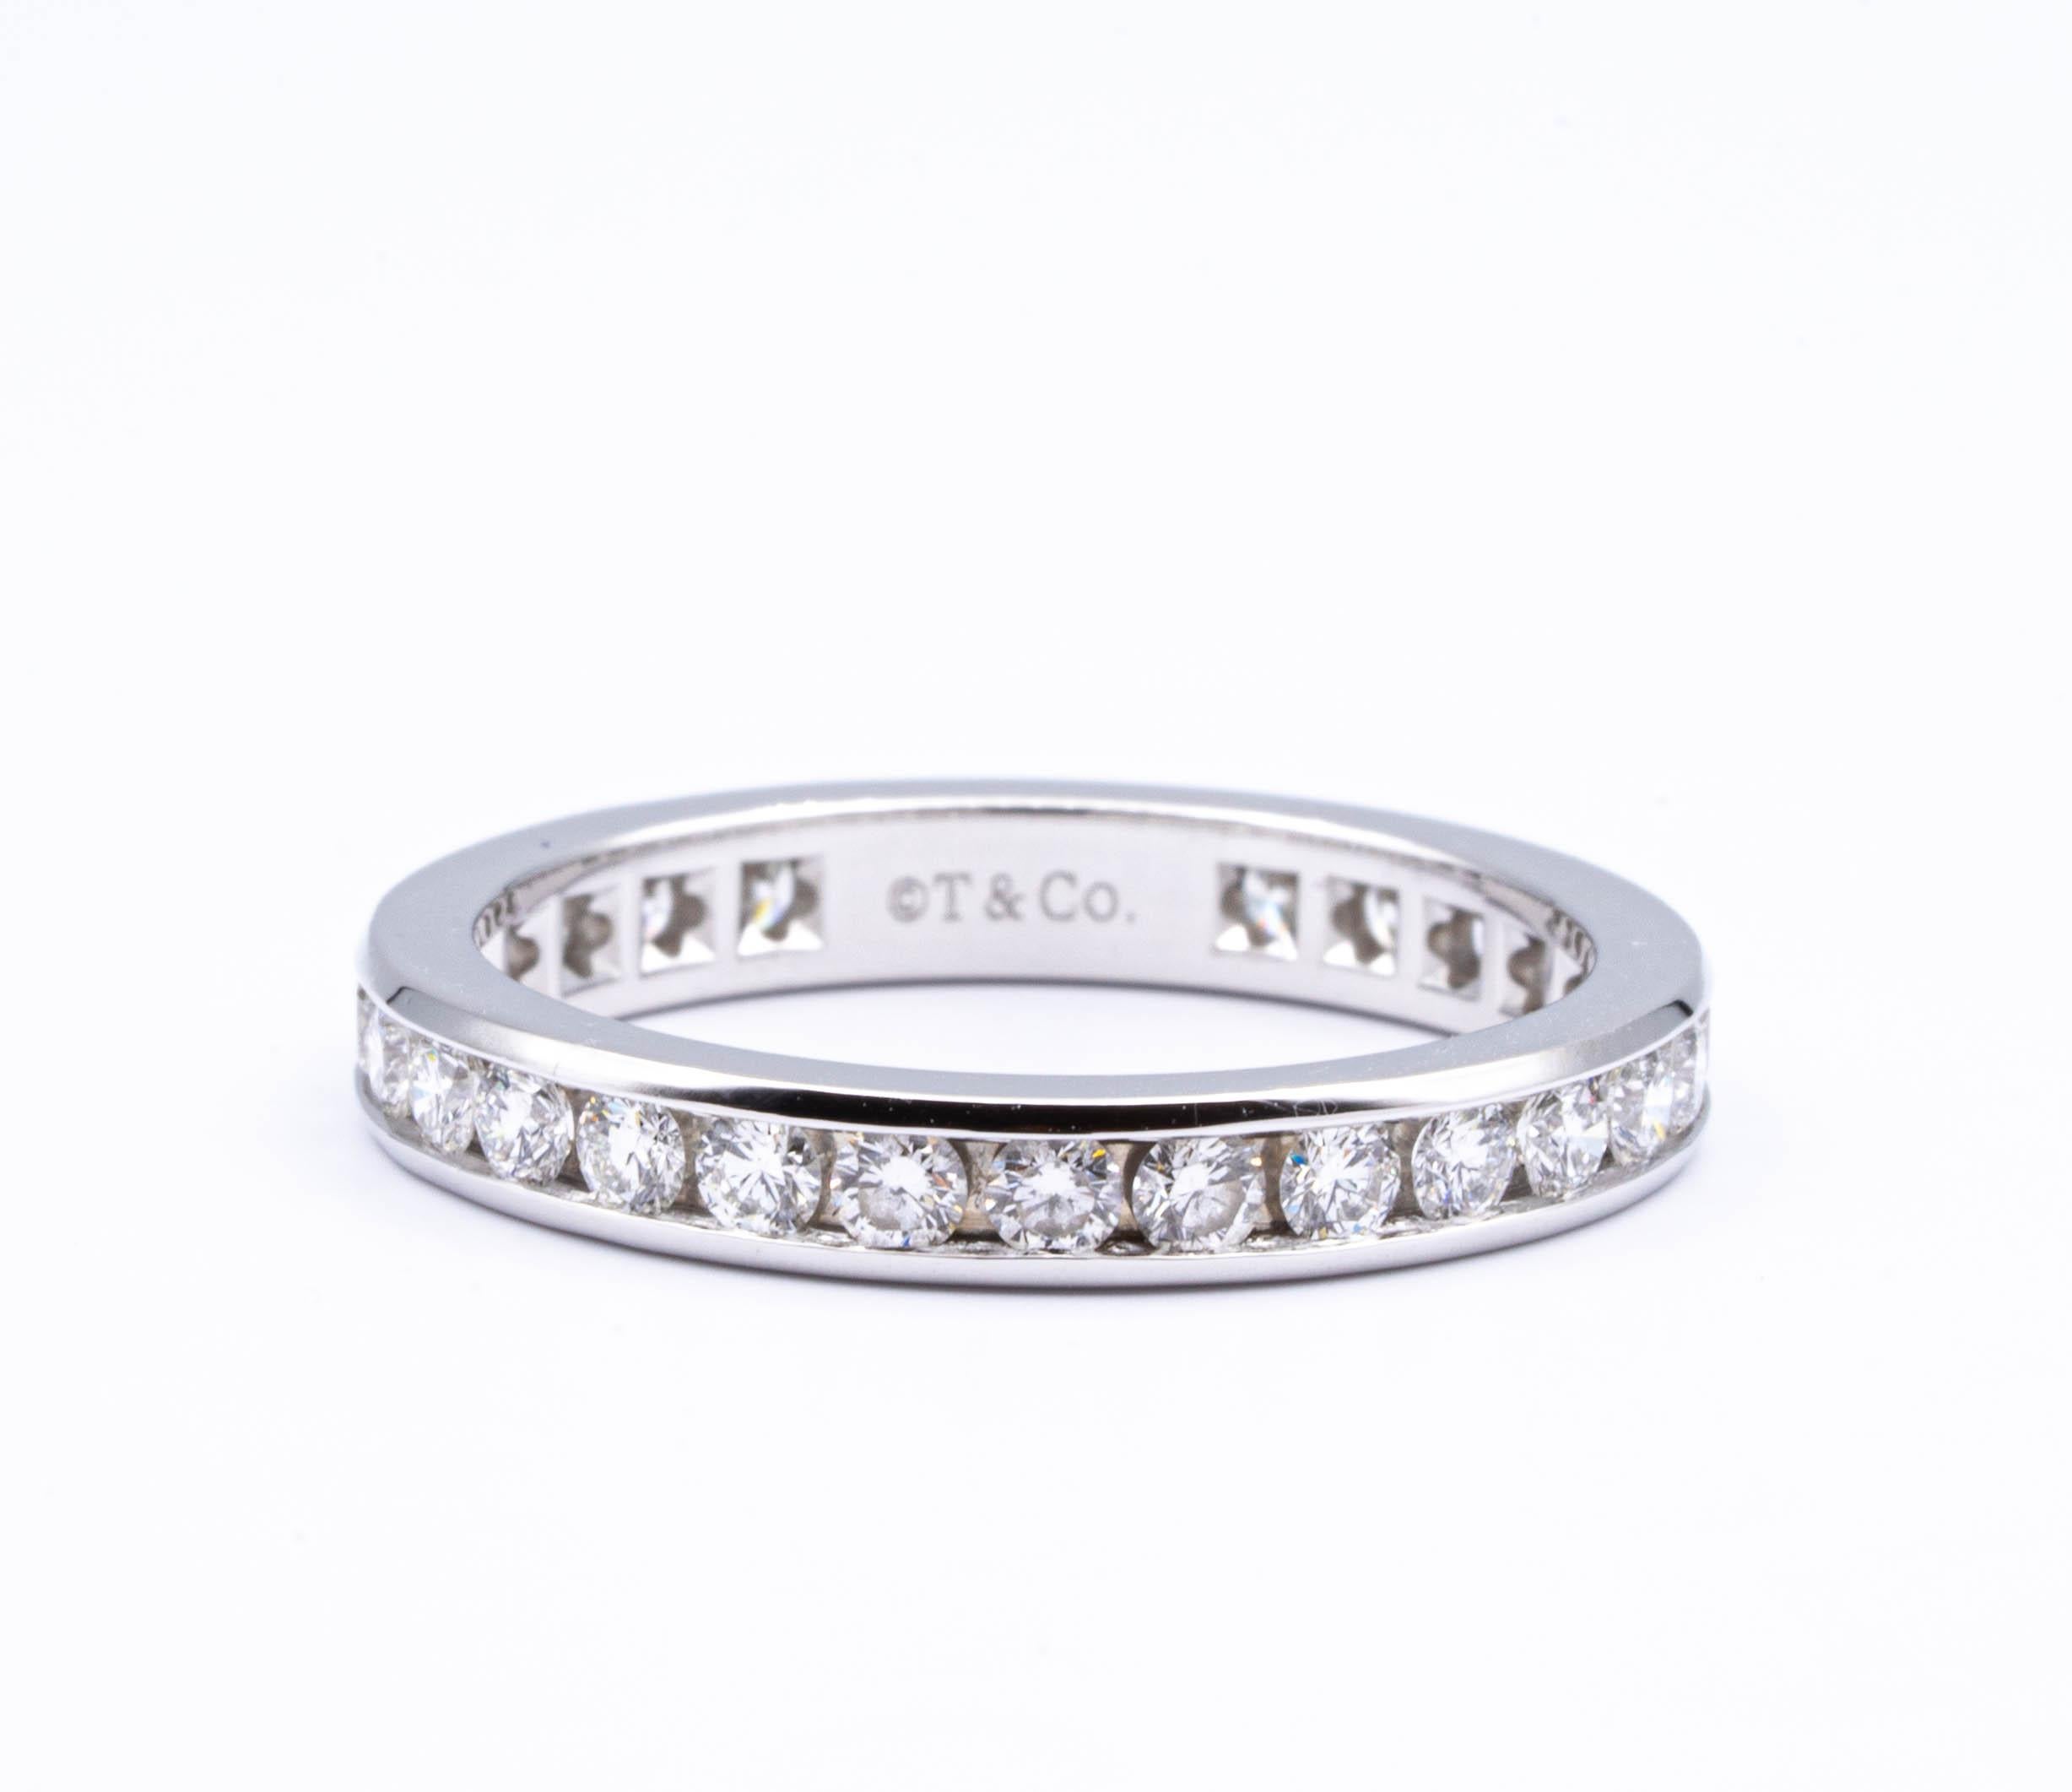 Tiffany & Co. wedding band finely crafted in platinum, with round brilliant cut diamonds weighing 1.00 carats total weight approximately set all the way around in a channel setting in Platinum. The ring is 3mm wide. (Retails $5,200)
Comes in